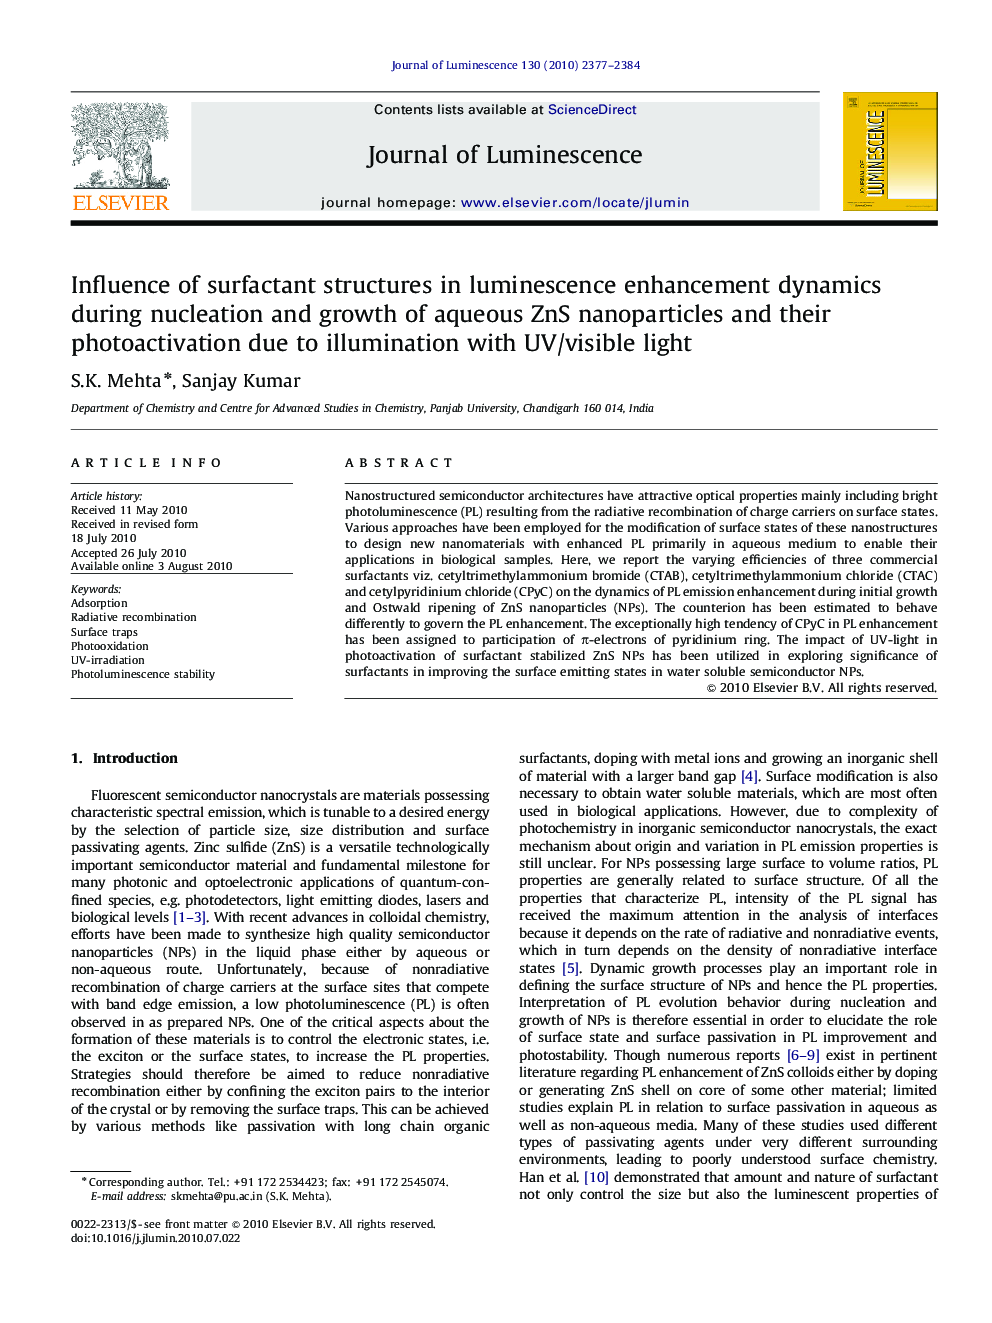 Influence of surfactant structures in luminescence enhancement dynamics during nucleation and growth of aqueous ZnS nanoparticles and their photoactivation due to illumination with UV/visible light